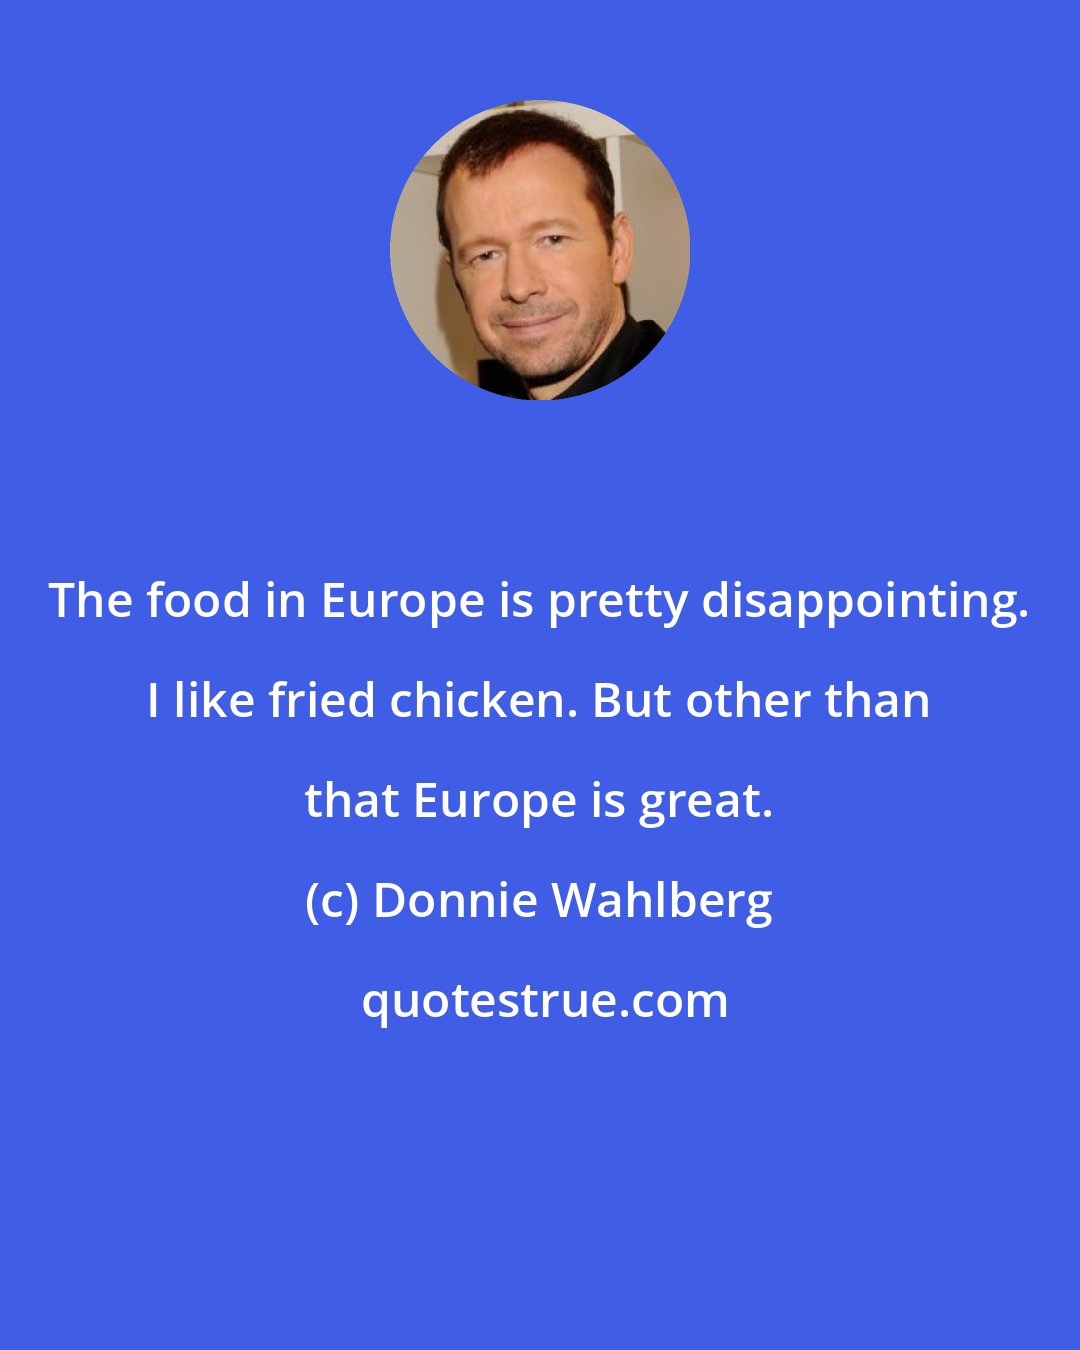 Donnie Wahlberg: The food in Europe is pretty disappointing. I like fried chicken. But other than that Europe is great.